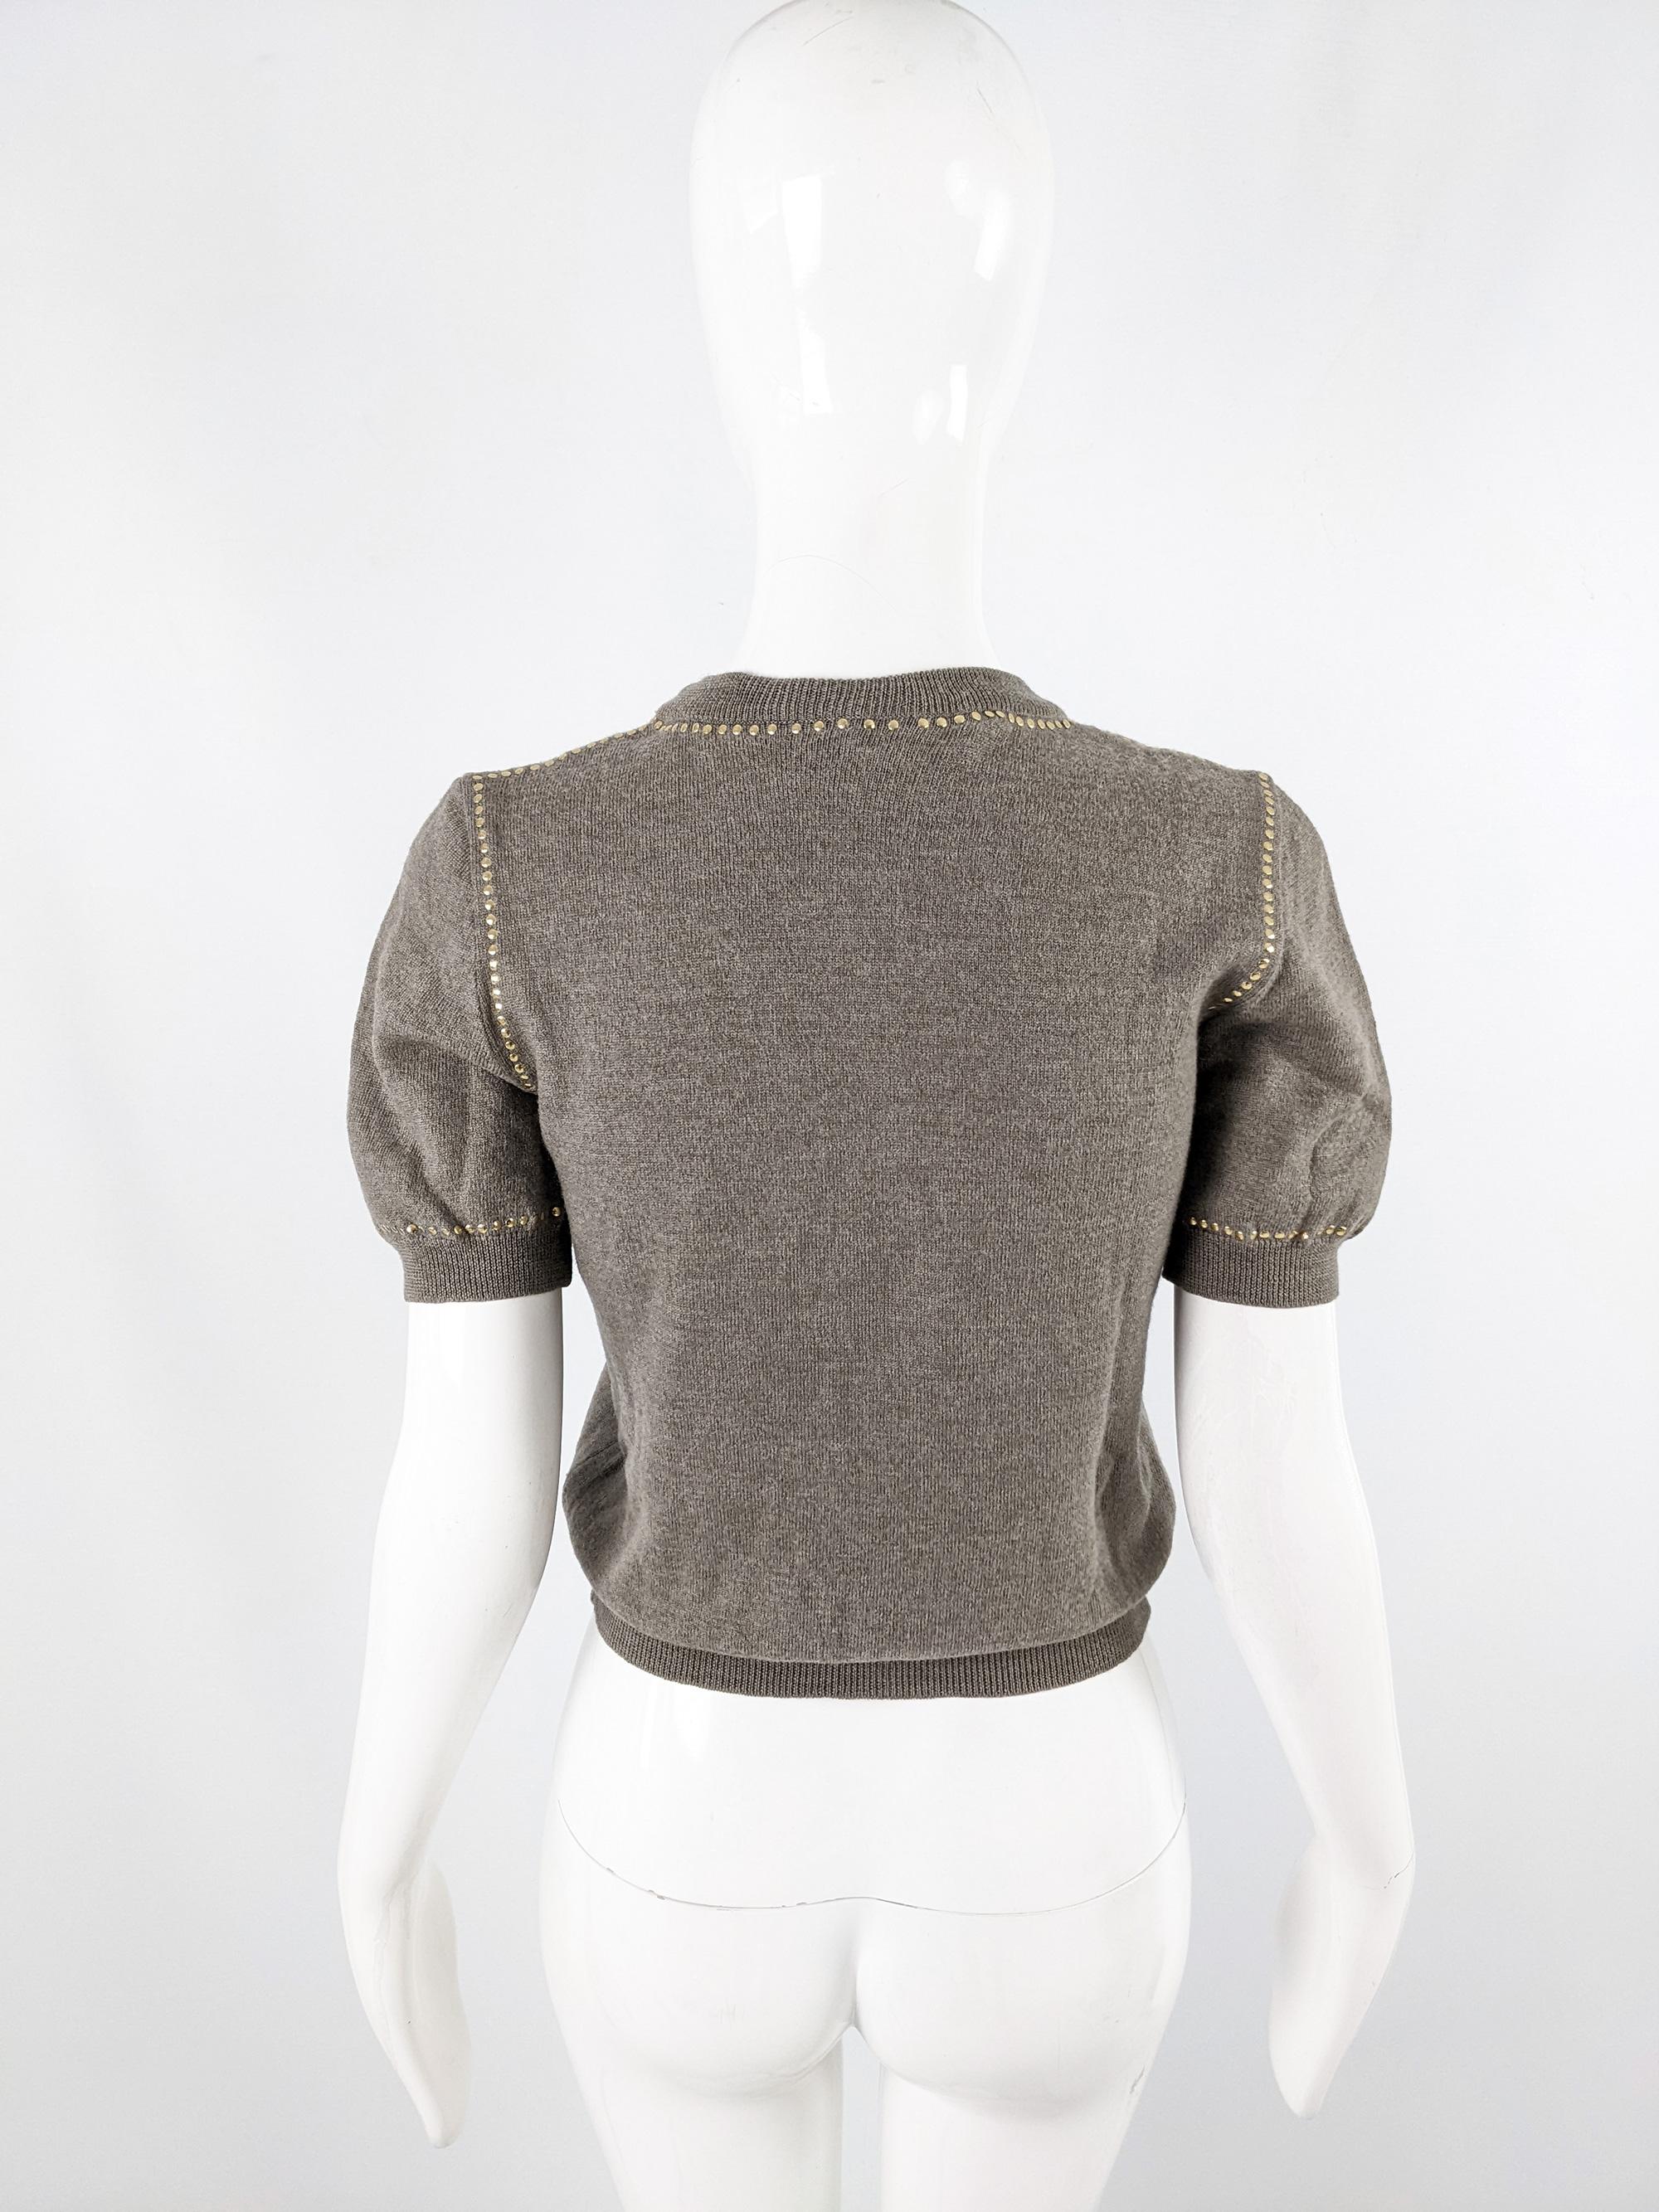 Valentino Vintage Taupe Wool Studded Puff Sleeve Knitwear Sweater